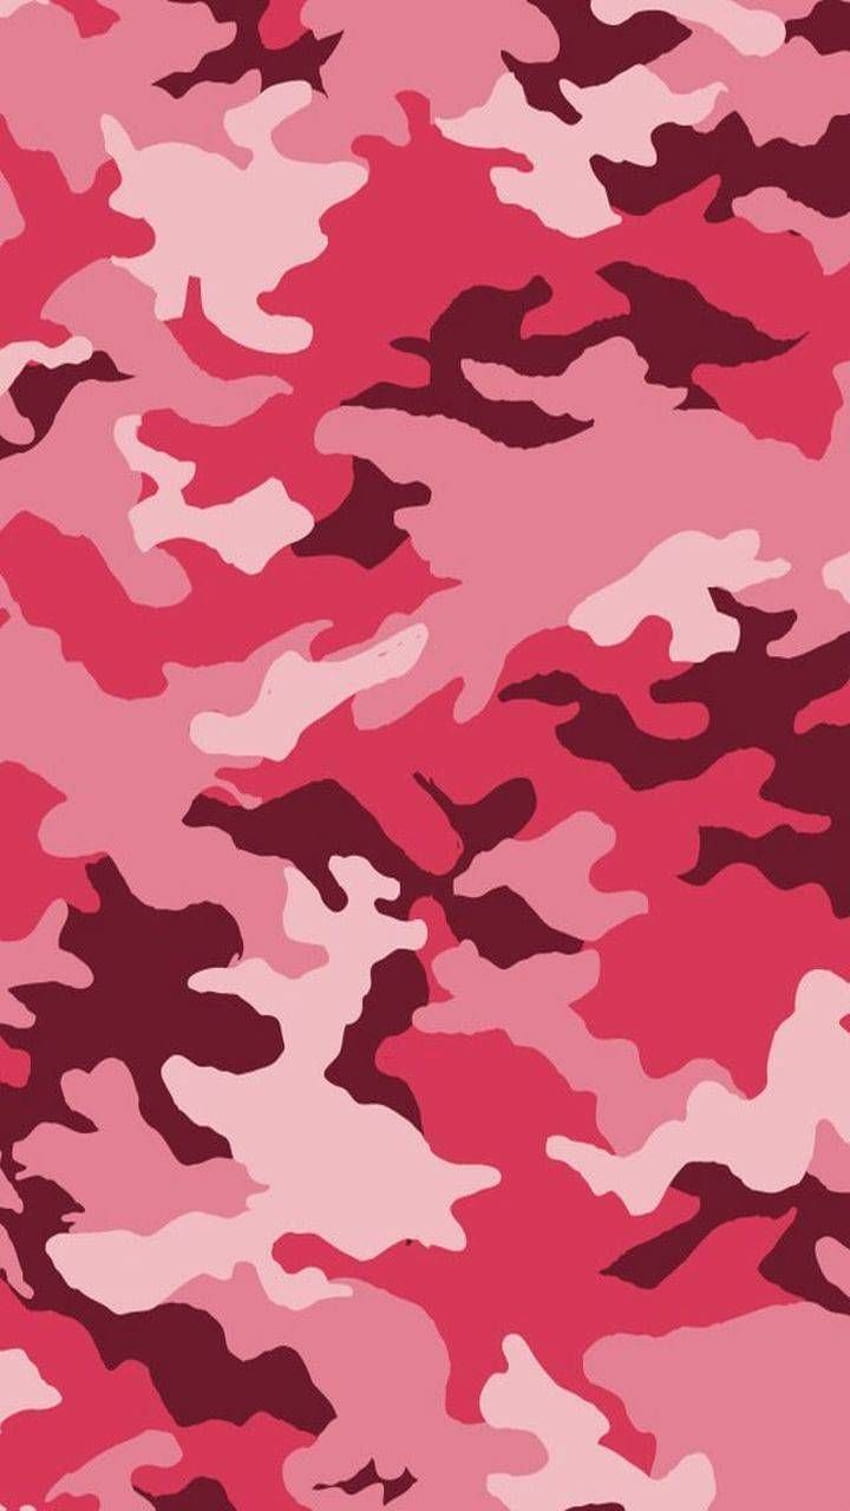 Camo by Tw1stedB3auty, aesthetic camouflage HD phone wallpaper